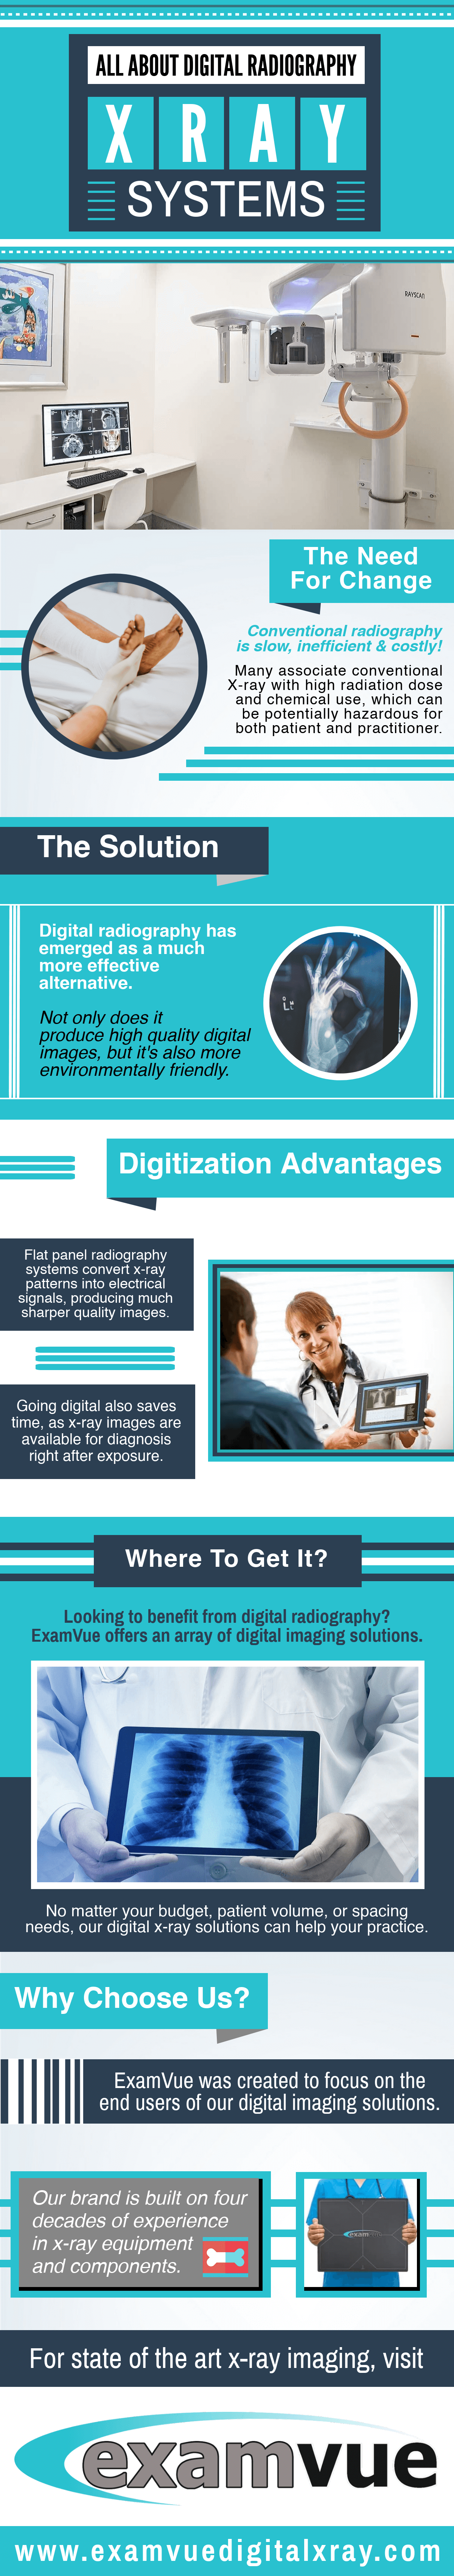 All About Digital Radiography XRAY Systems